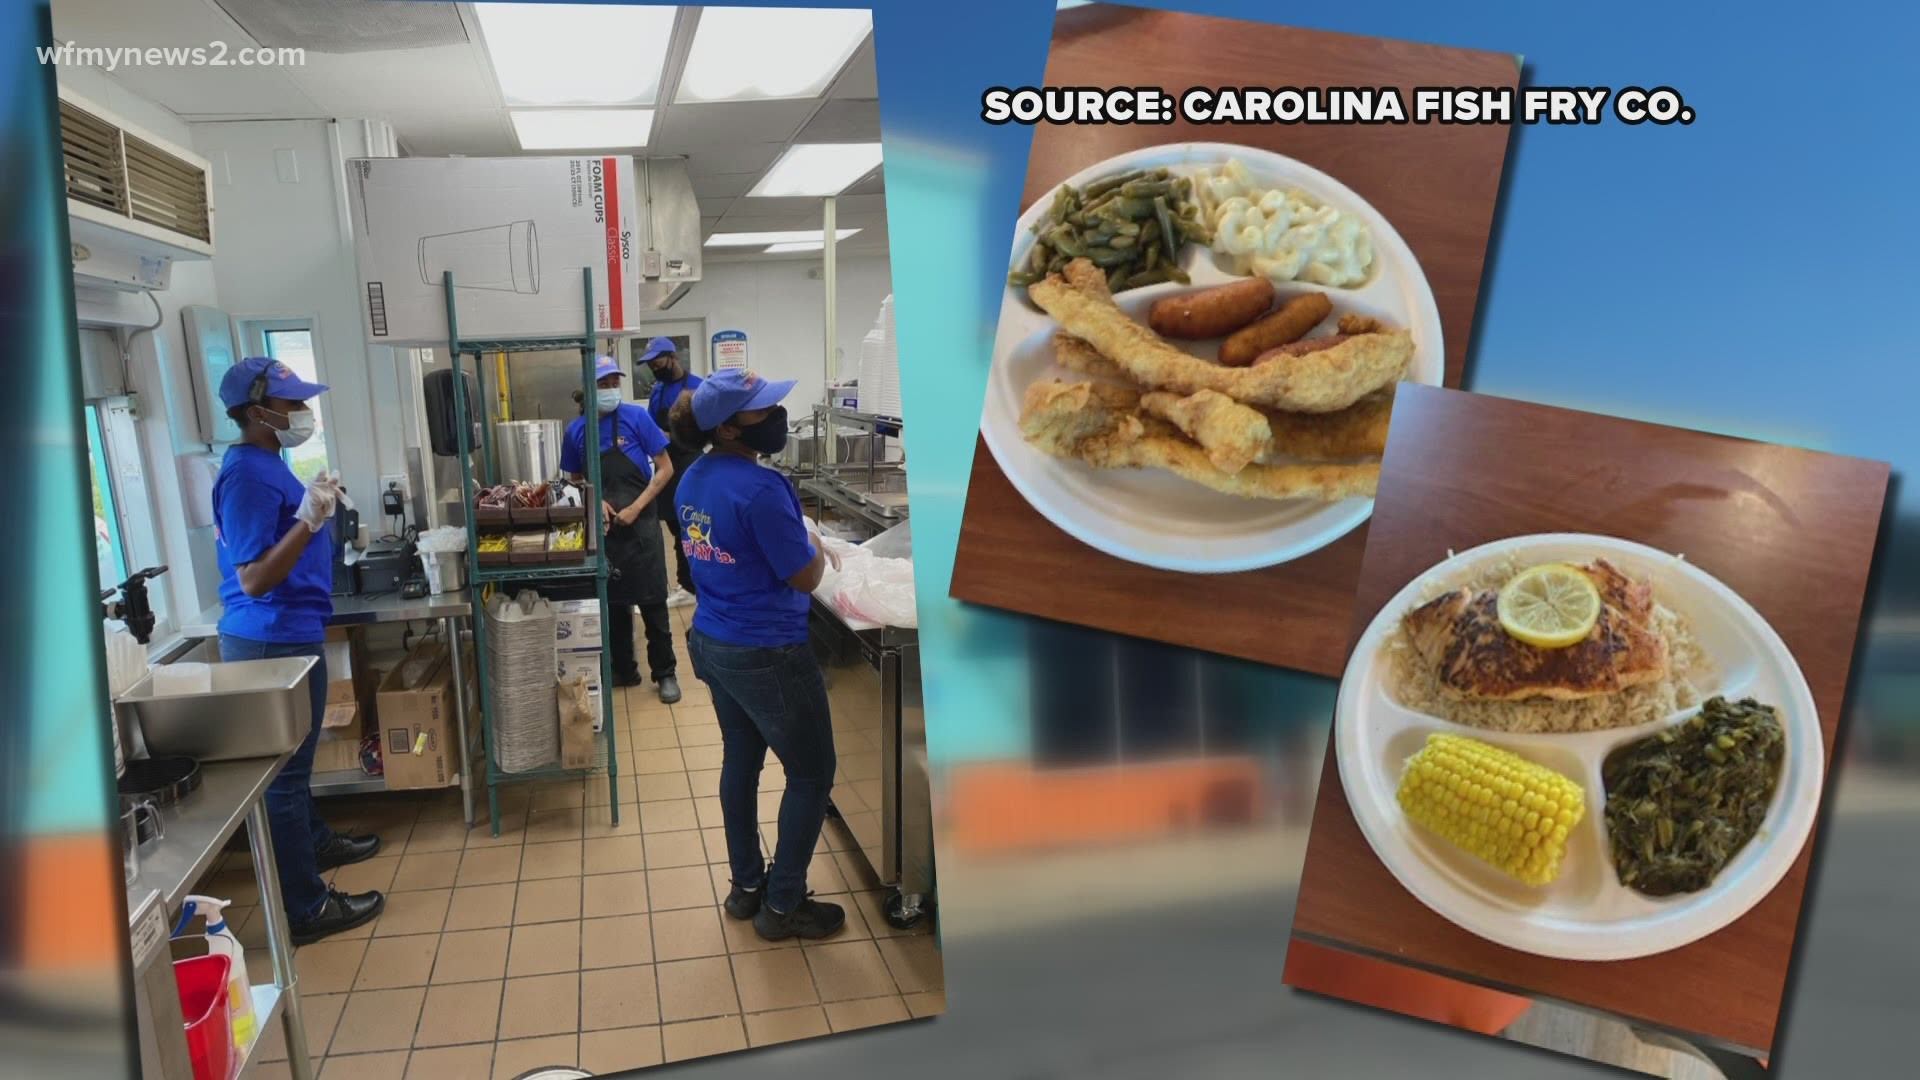 Carolina Fish Fry brings the calabash-style seafood to the Triad.